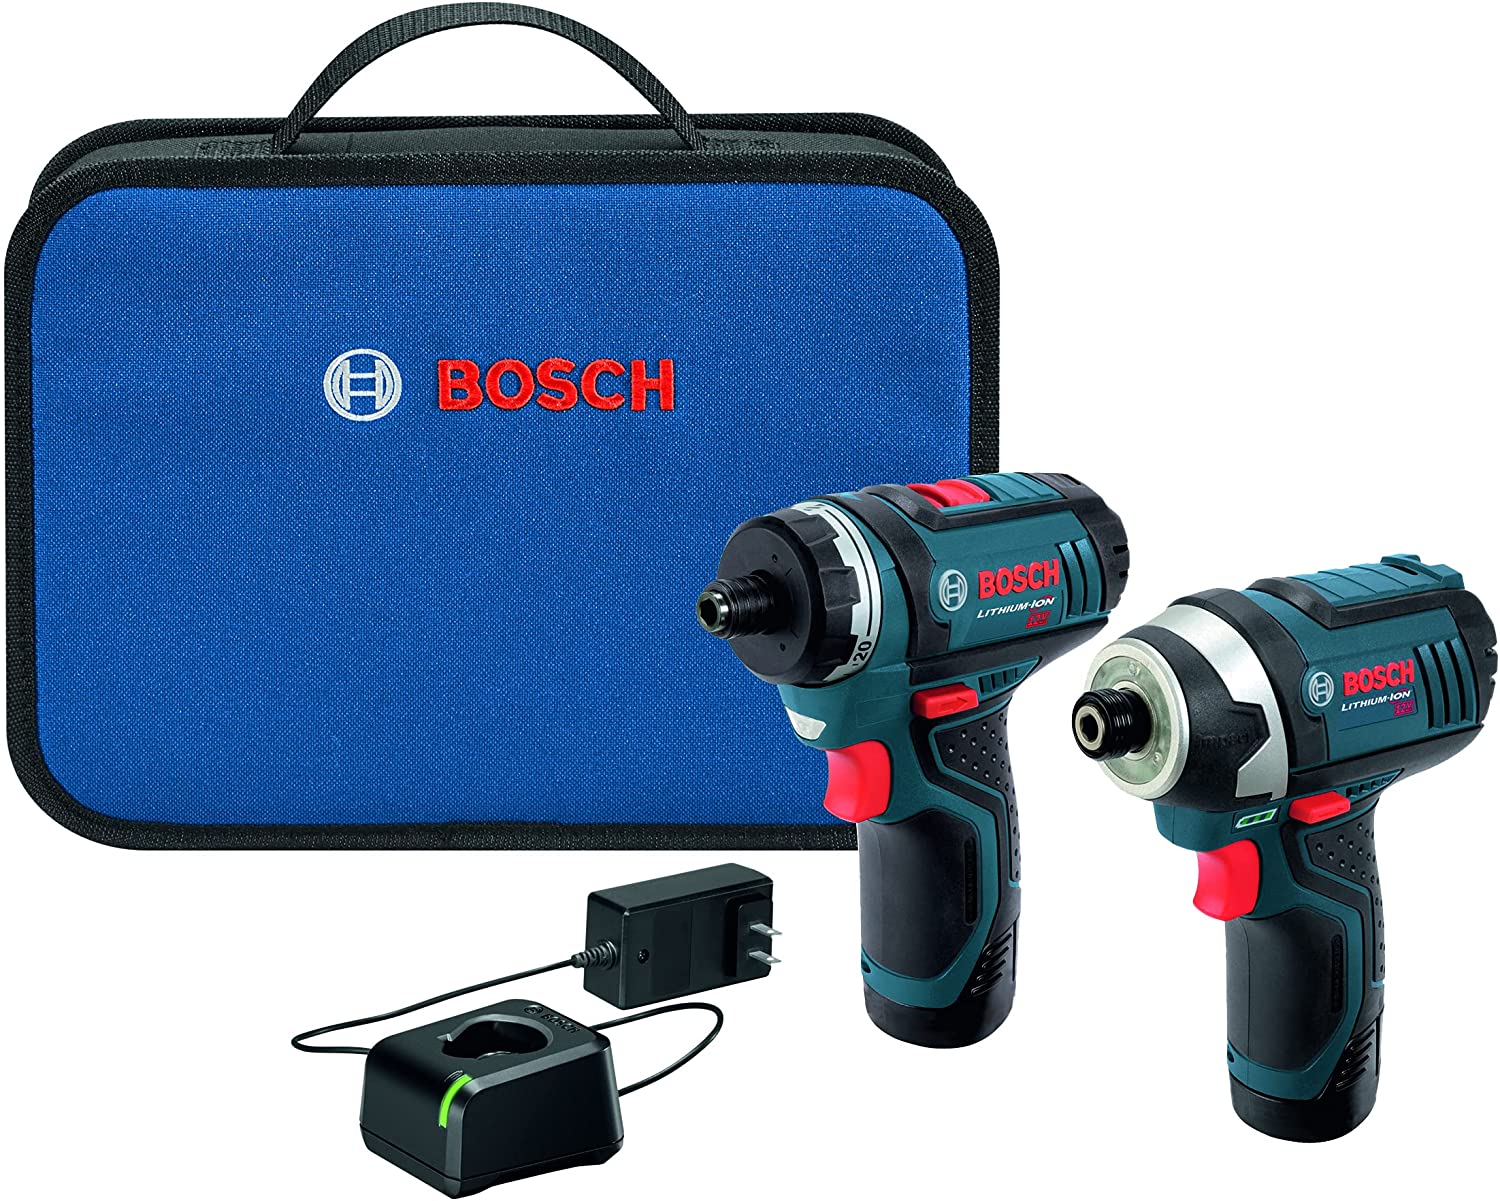 Bosch 12V Max 2-Tool Combo Kit (Drill/Driver and Impact Driver) with 2 .